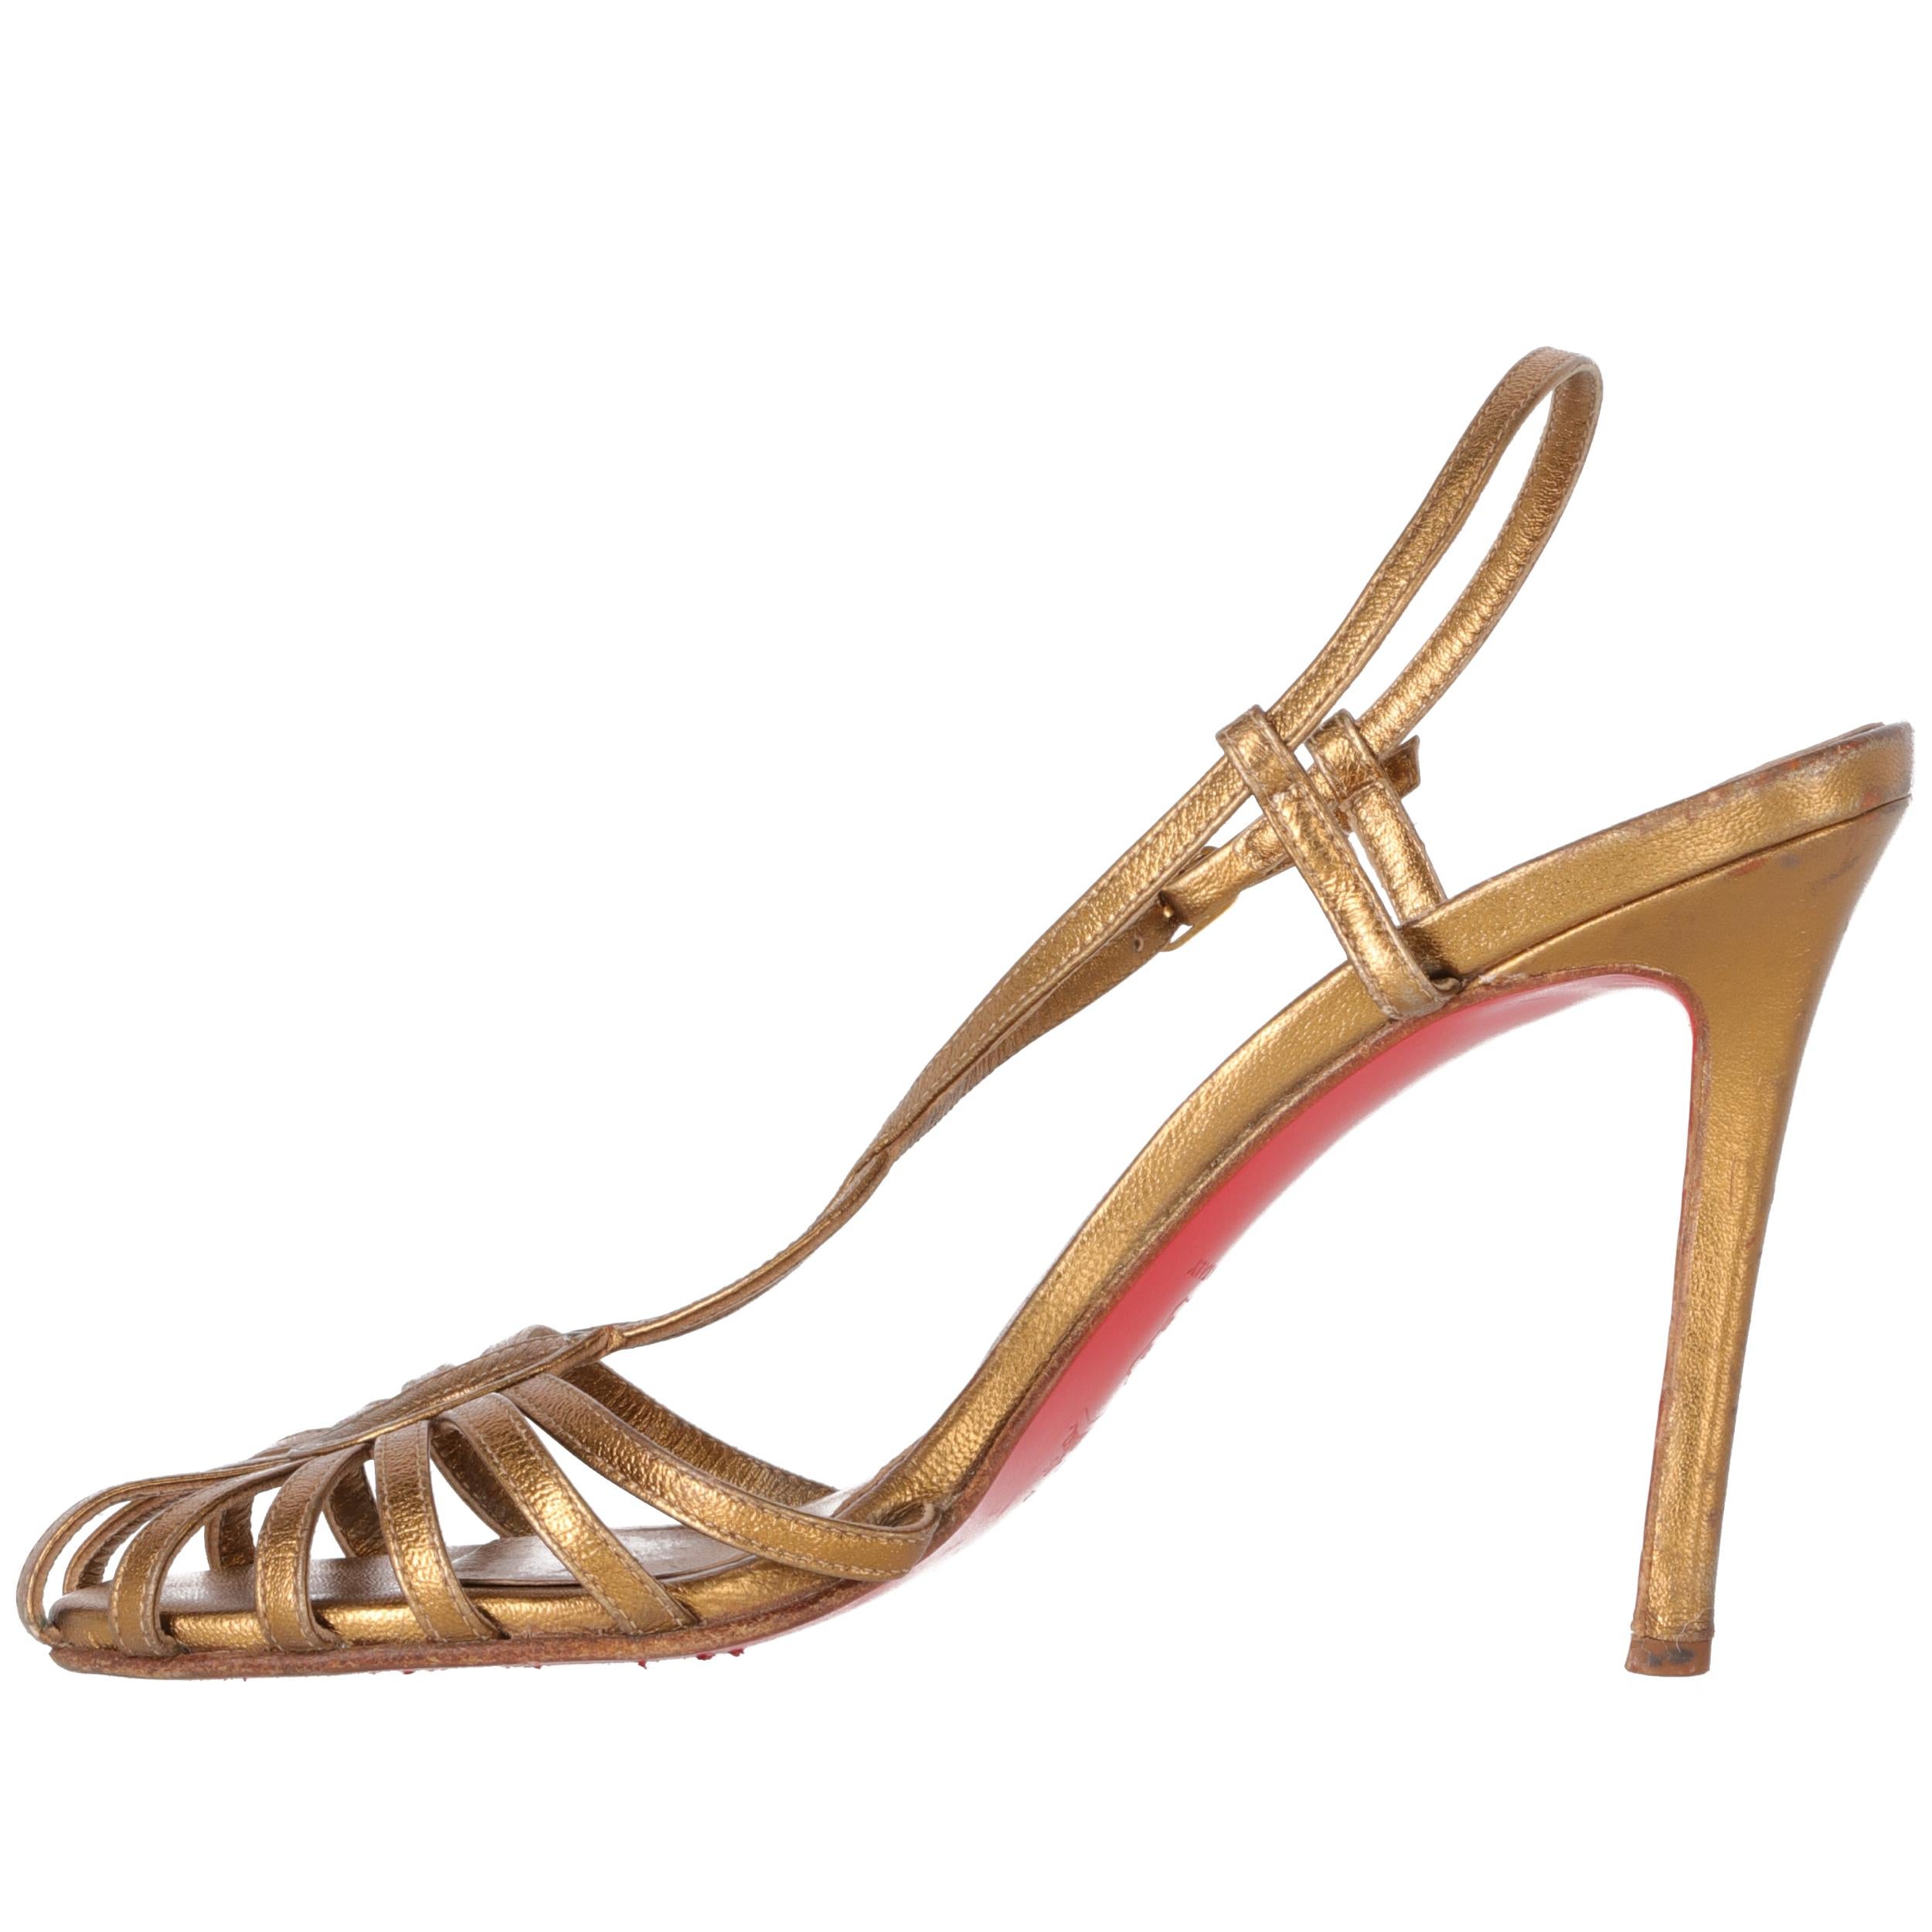 Christian Louboutin heels sandals in golden leather, with ankle strap, 10 cm high stiletto heel and iconic red sole.
The item shows signs of wear and a repair as shown in the pictures.

Years: 2000s

Made in France

Size: 37 EU

Heel height: 10